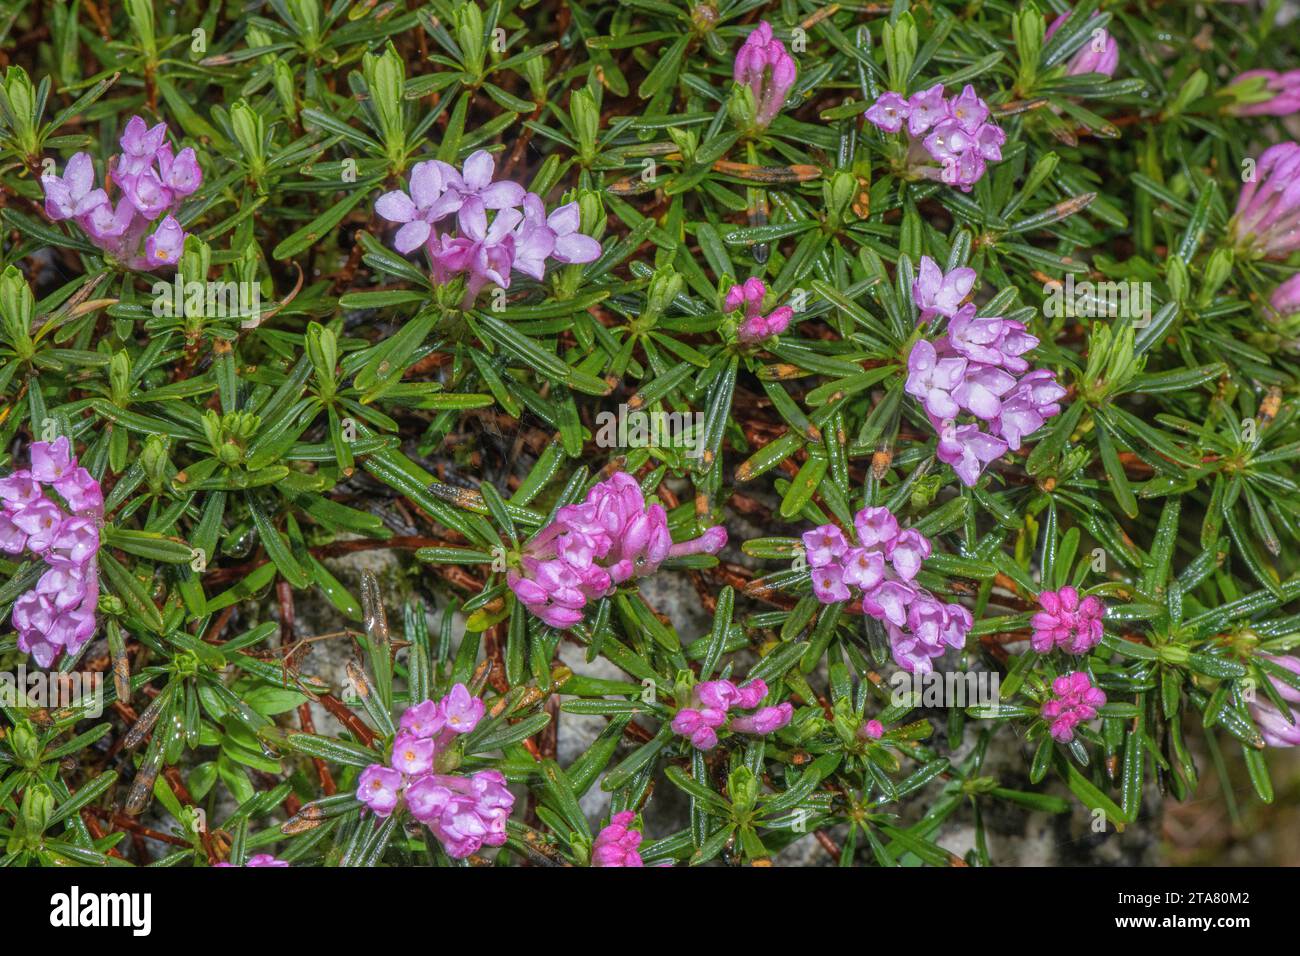 A shrubby Daphne, Daphne arbuscula, endemic to a small area of Slovakia. Stock Photo